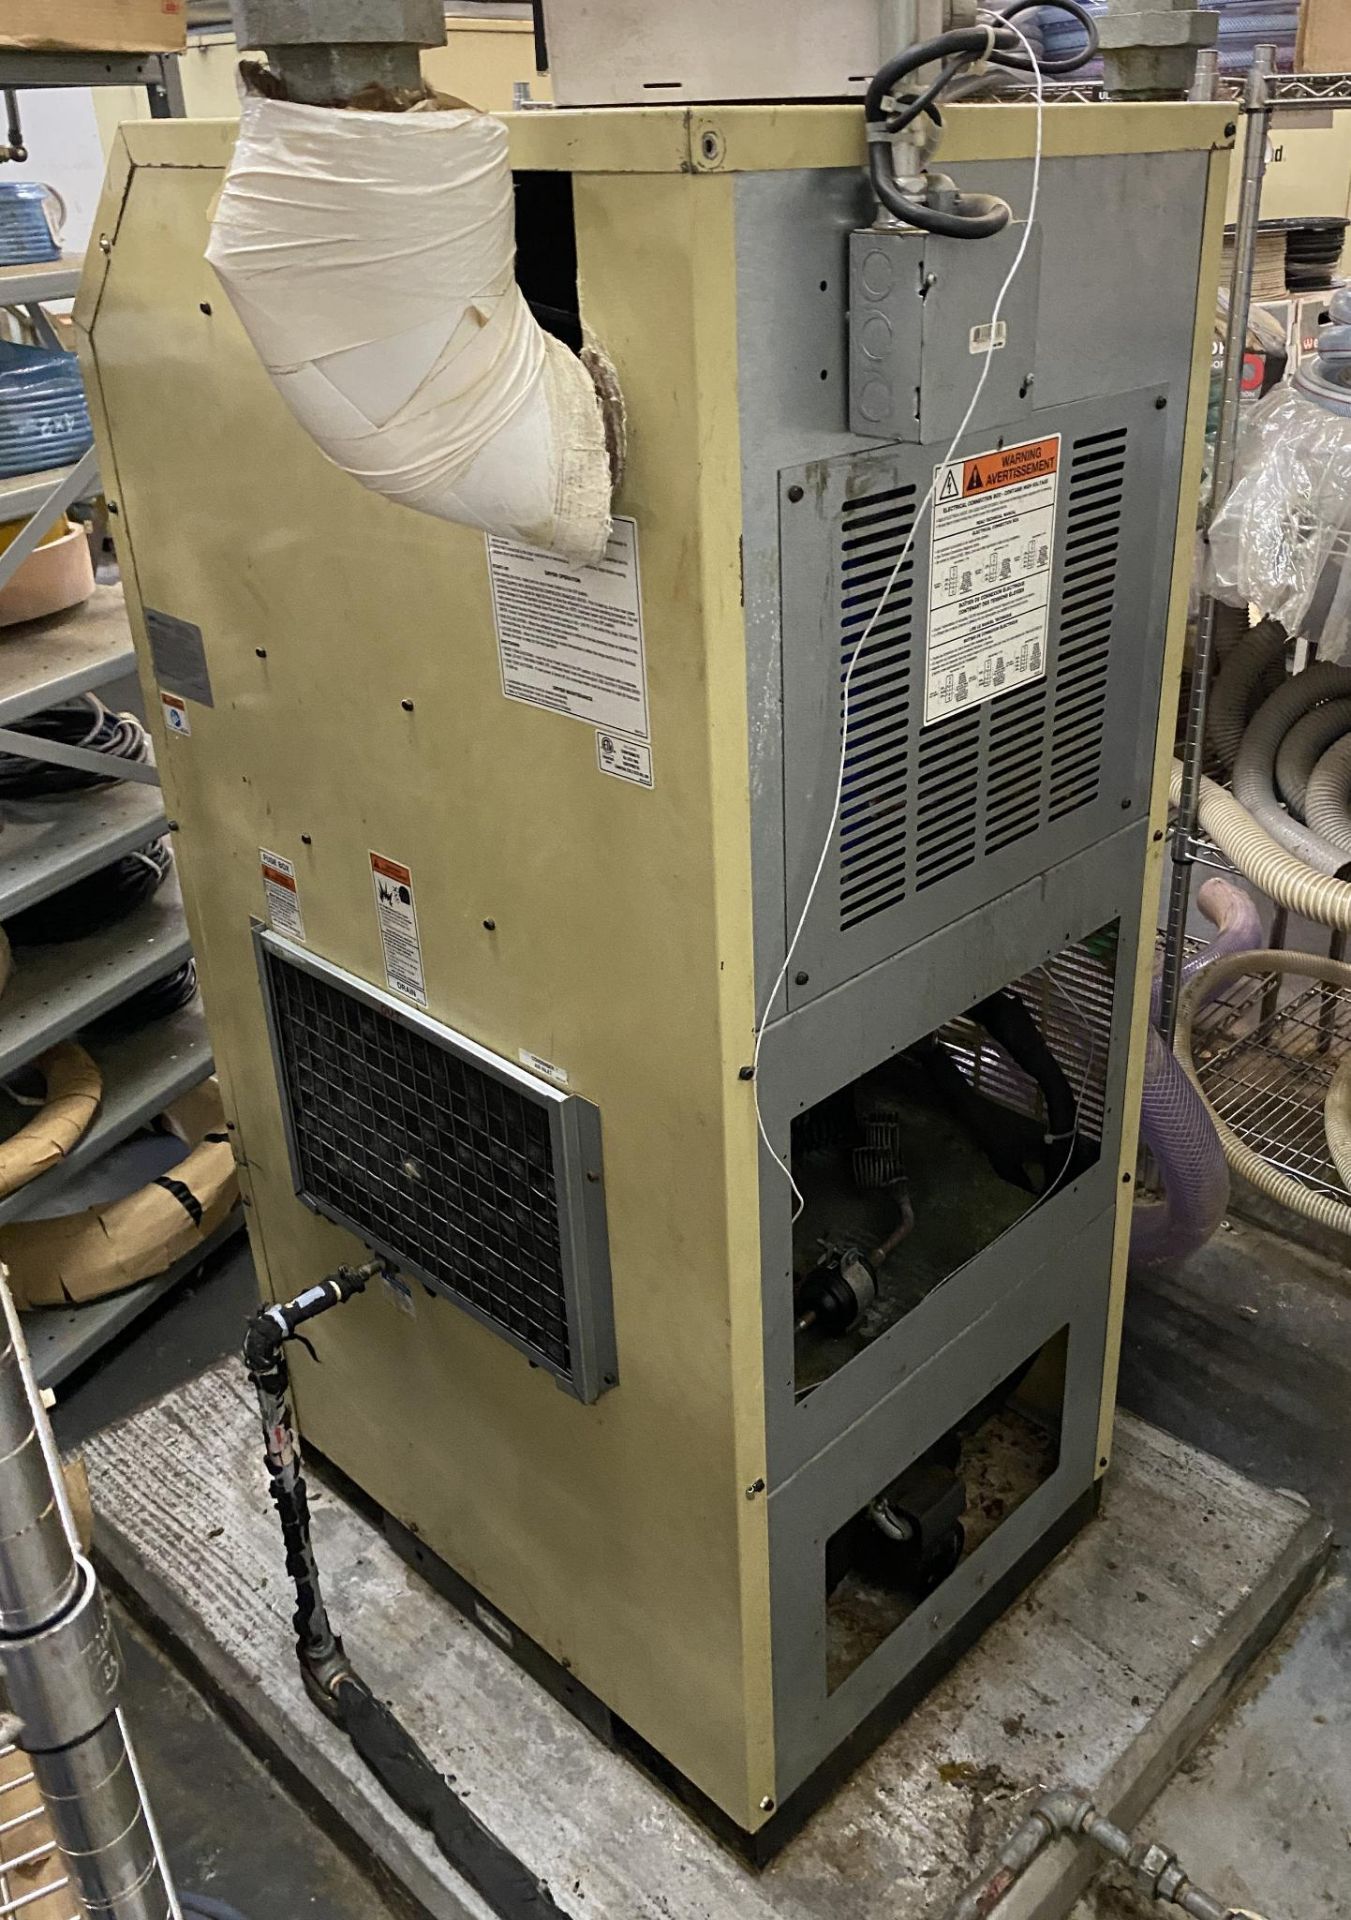 AIR DRYER, INGERSOLL-RAND MDL. NVC400A400, 460 v., 230 psi max. pressure, S/N WCH1006839 - Image 2 of 3